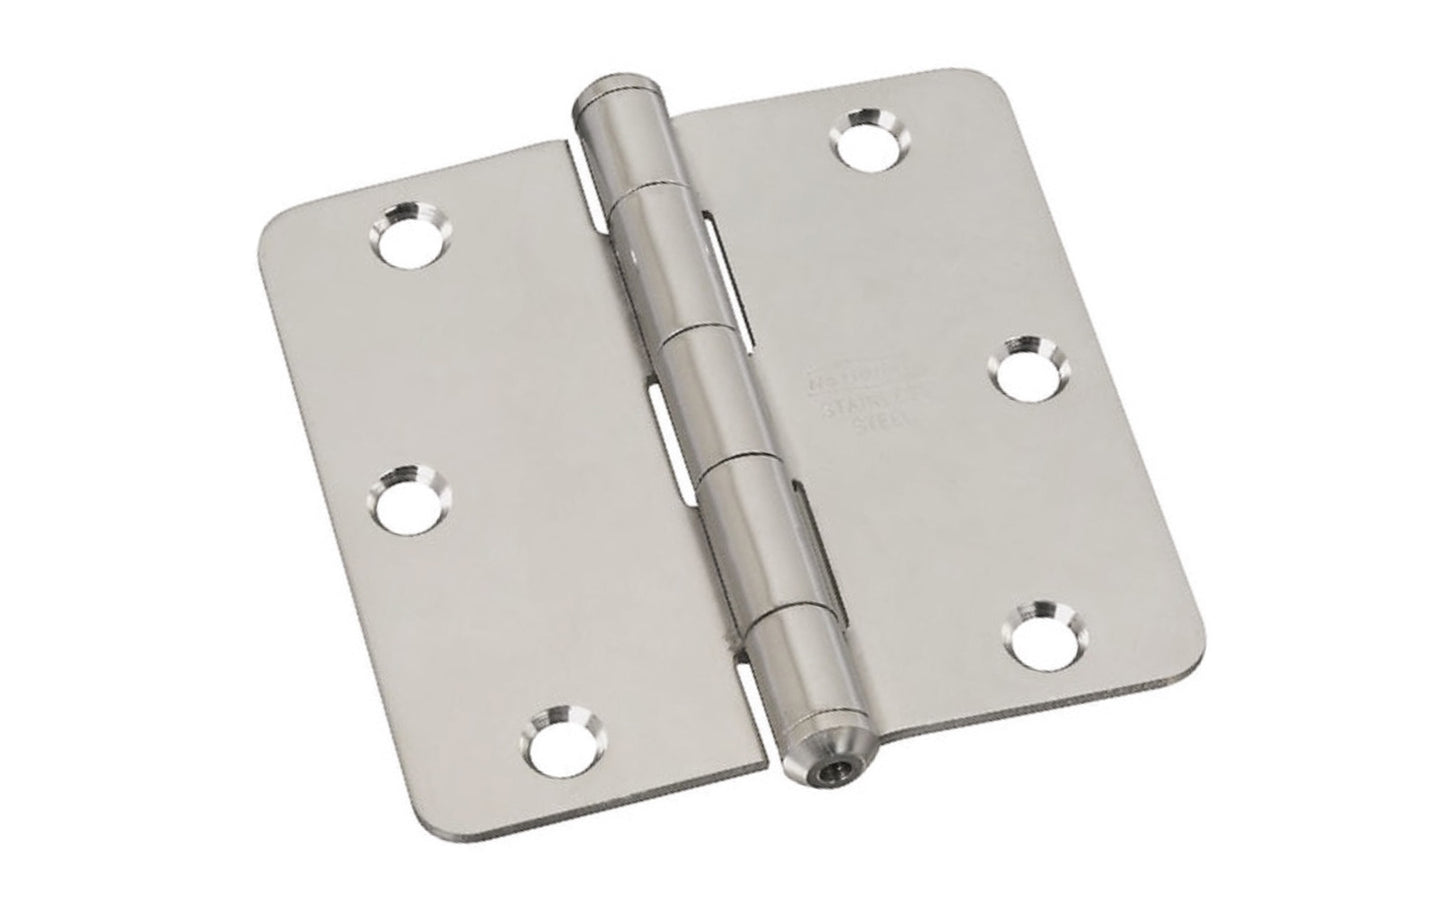 3-1/2" Stainless Door Hinge - 1/4" Radius. Made of stainless steel material, 300 series for maximum corrosion resistance. Nob on hinge for finished appearance with square corners. Non-rising pin. Screw holes are countersunk. Sold as single hinge in pack.  National Hardware Model No. N225-946. 038613225947